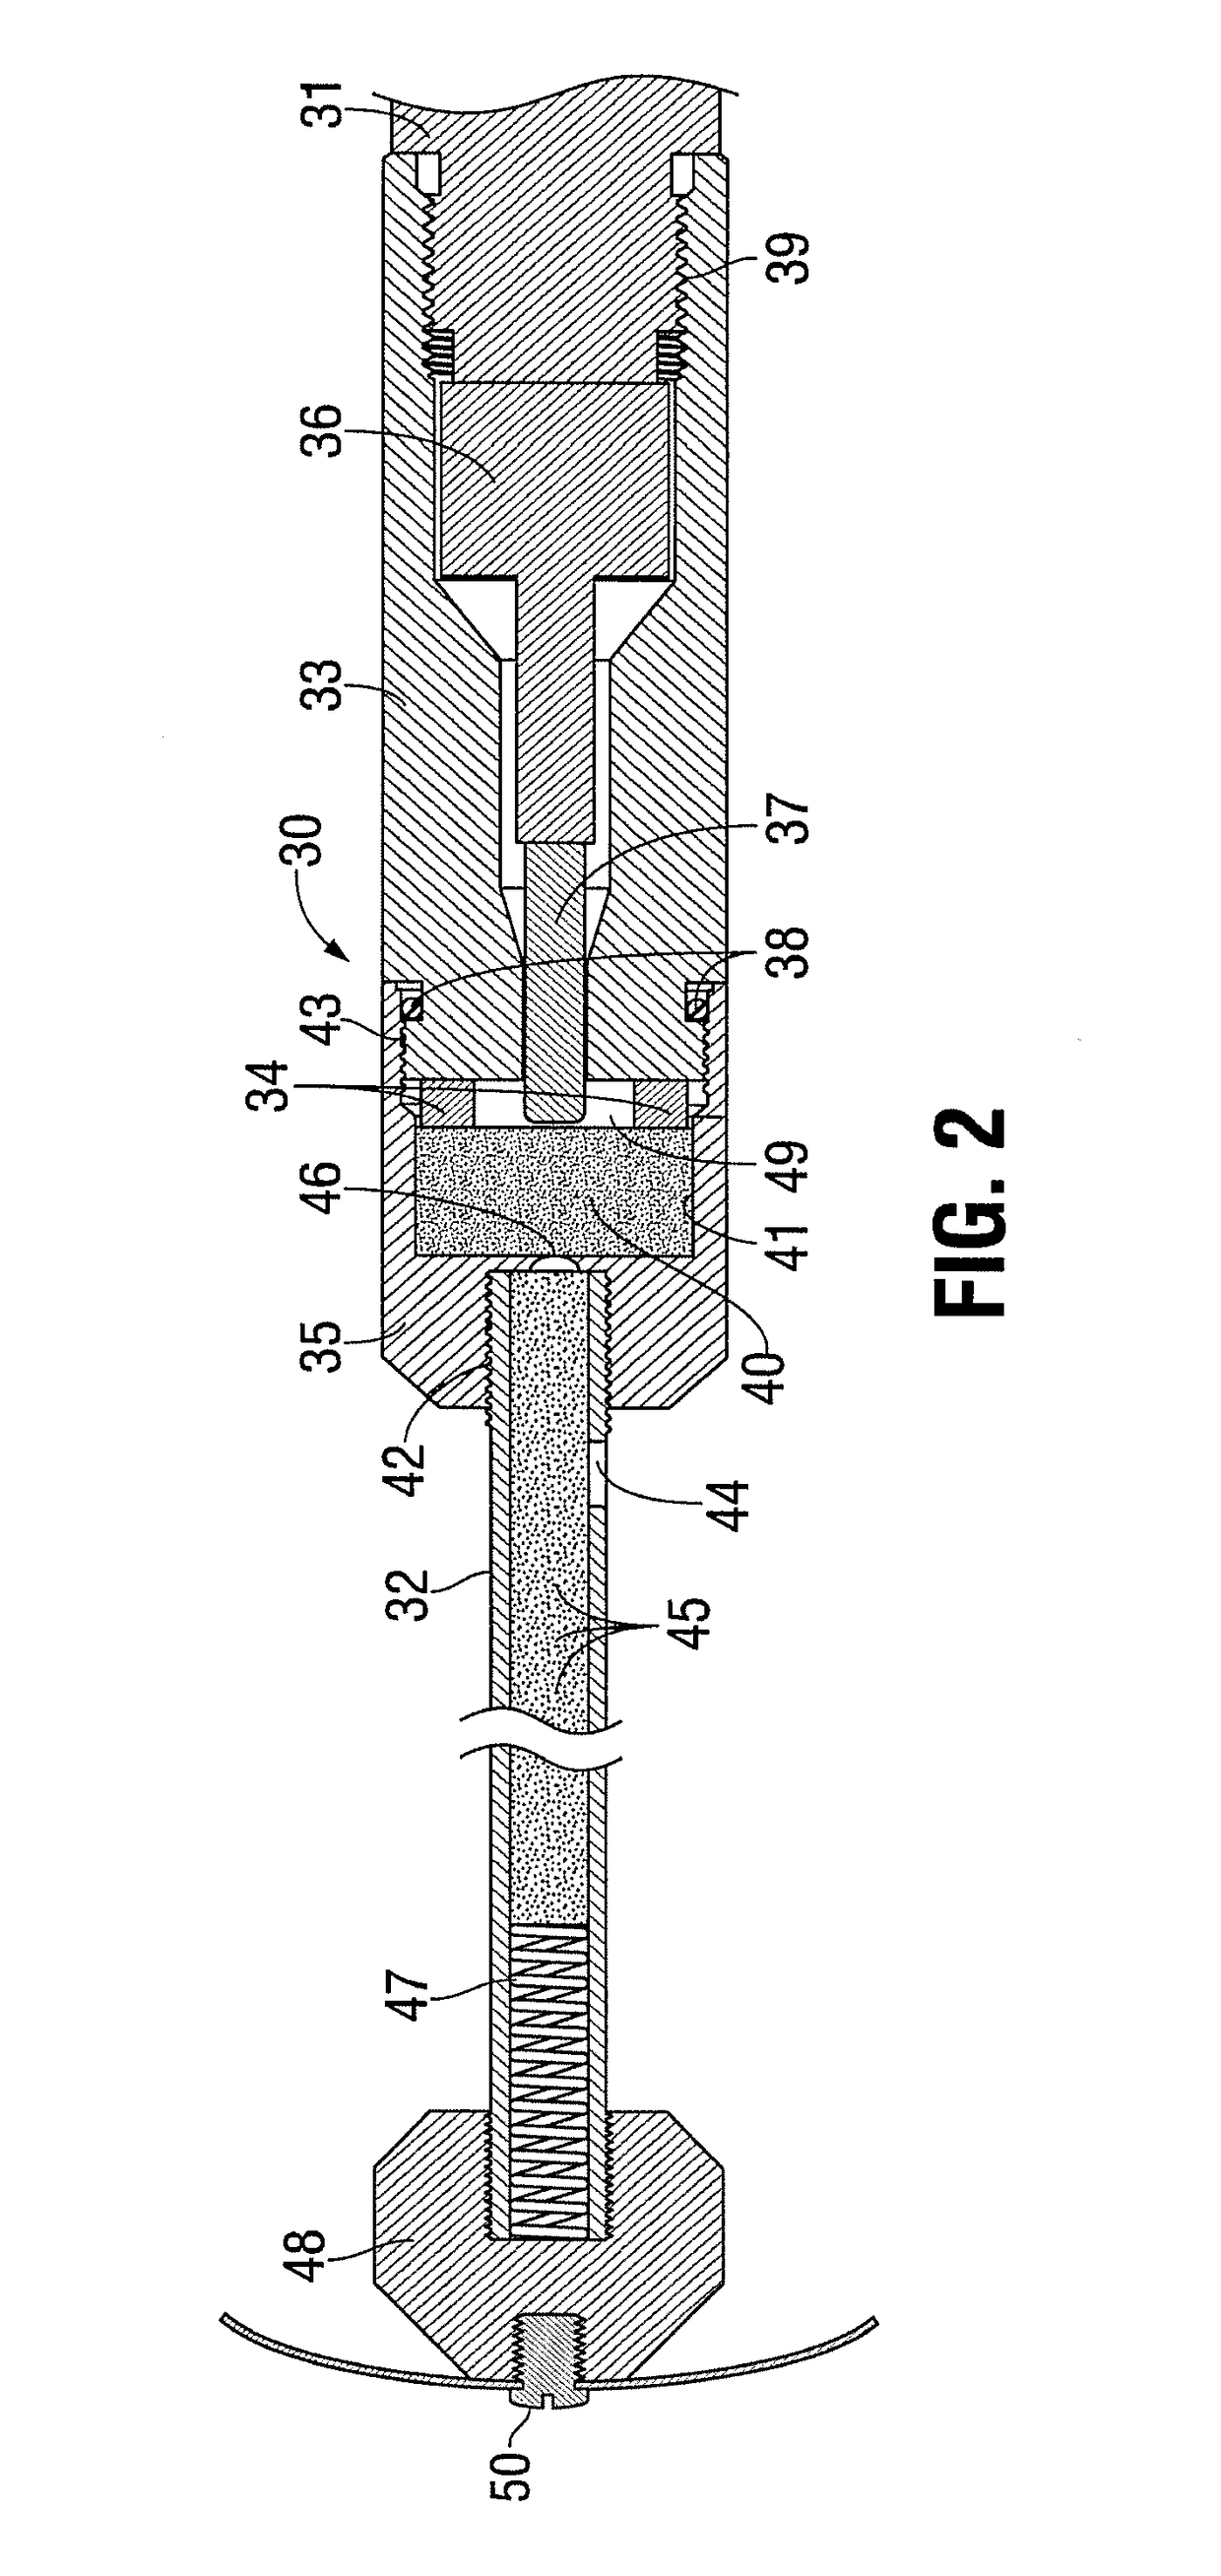 Mini-Severing And Back-Off Tool With Pressure Balanced Explosives